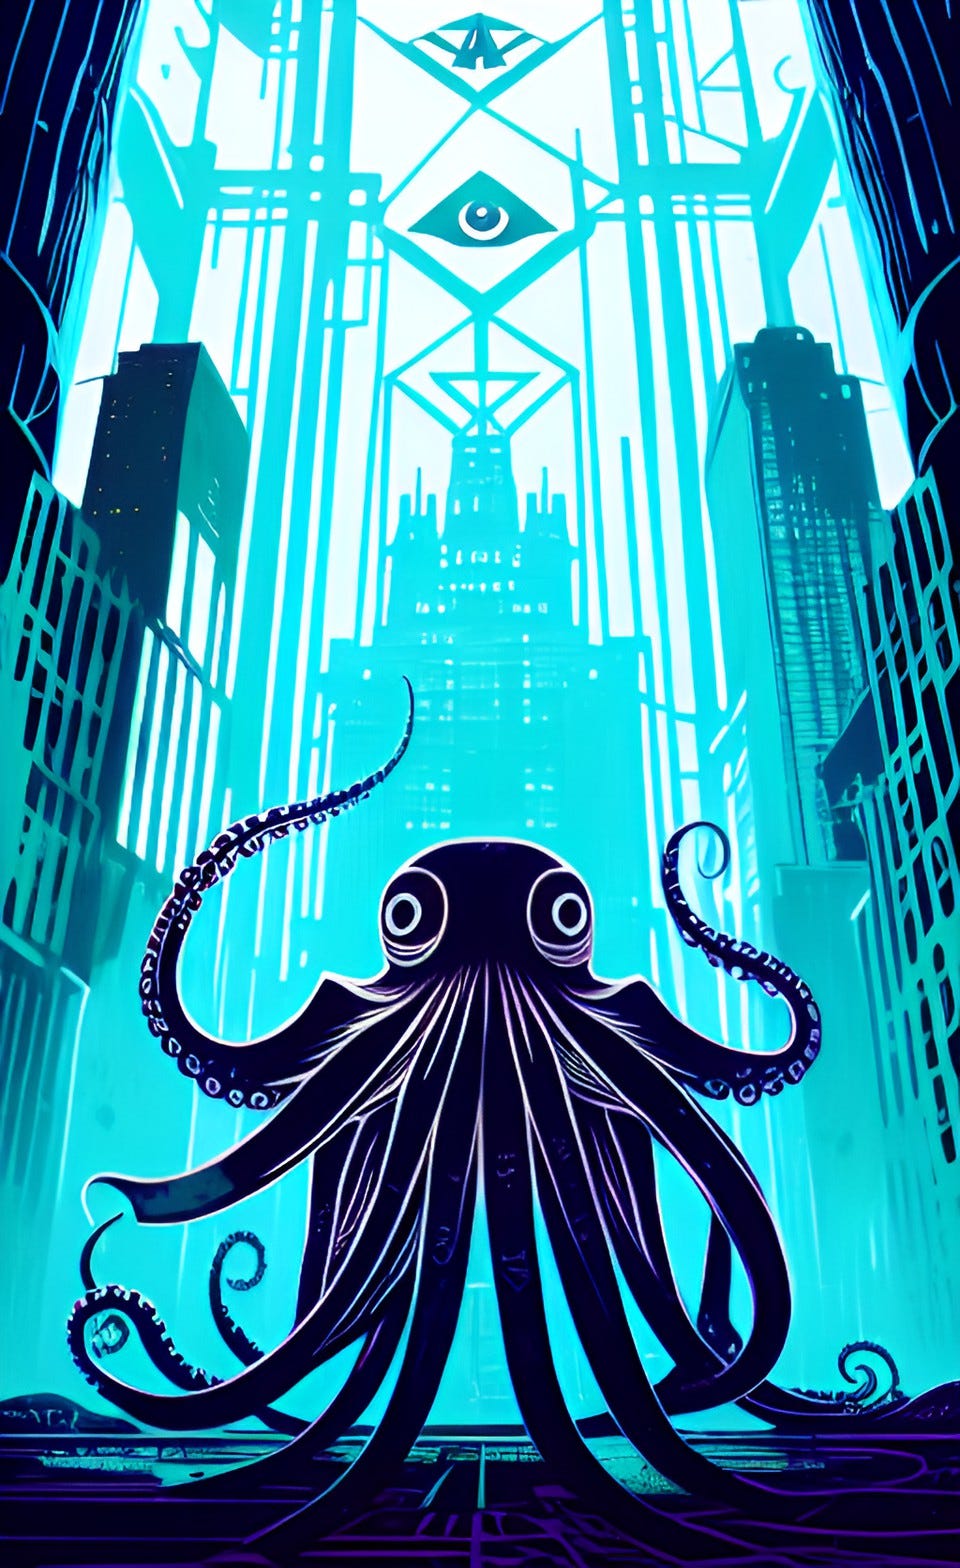 Artist's depiction of Octavius the mysterious octopus